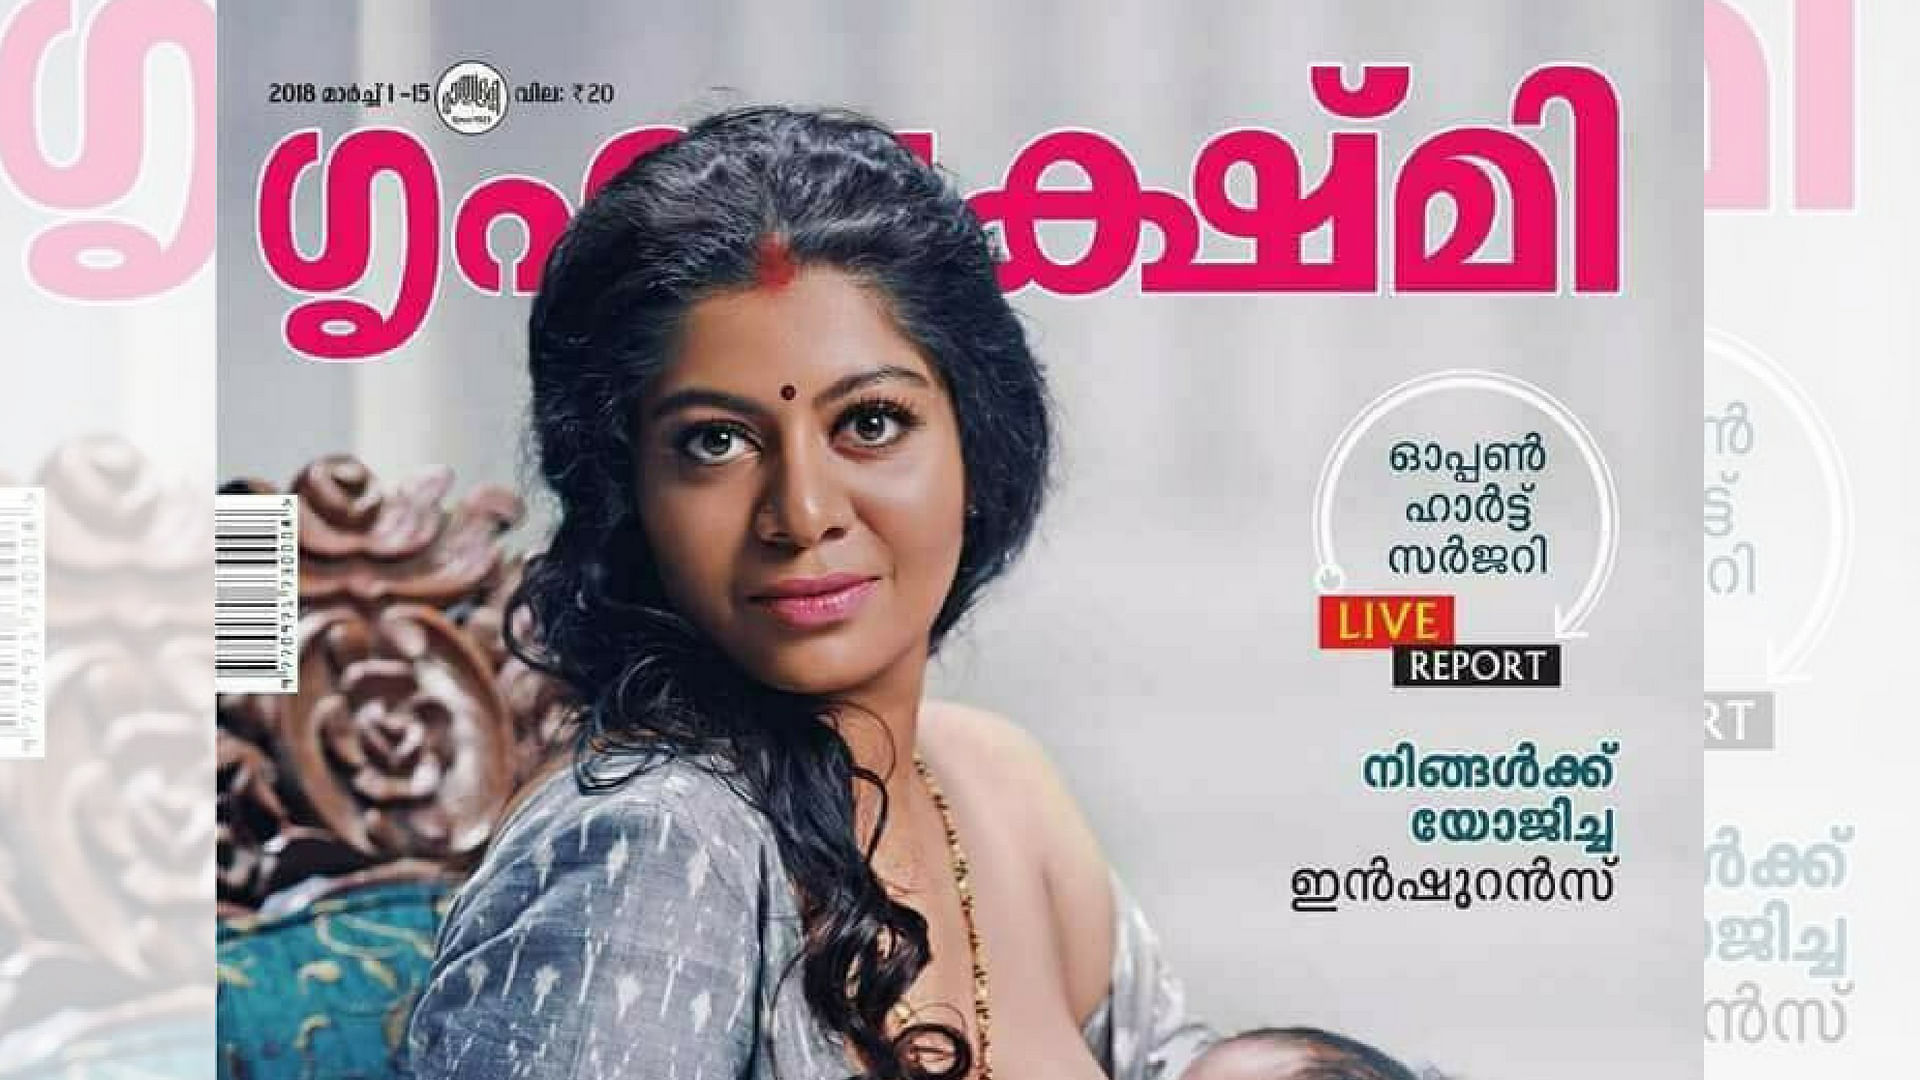 Gilu Joseph appeared on the cover of Grihalakshmi Magazine’s March 2018 edition, as a part of their ‘Breastfeeding Freely’ campaign.